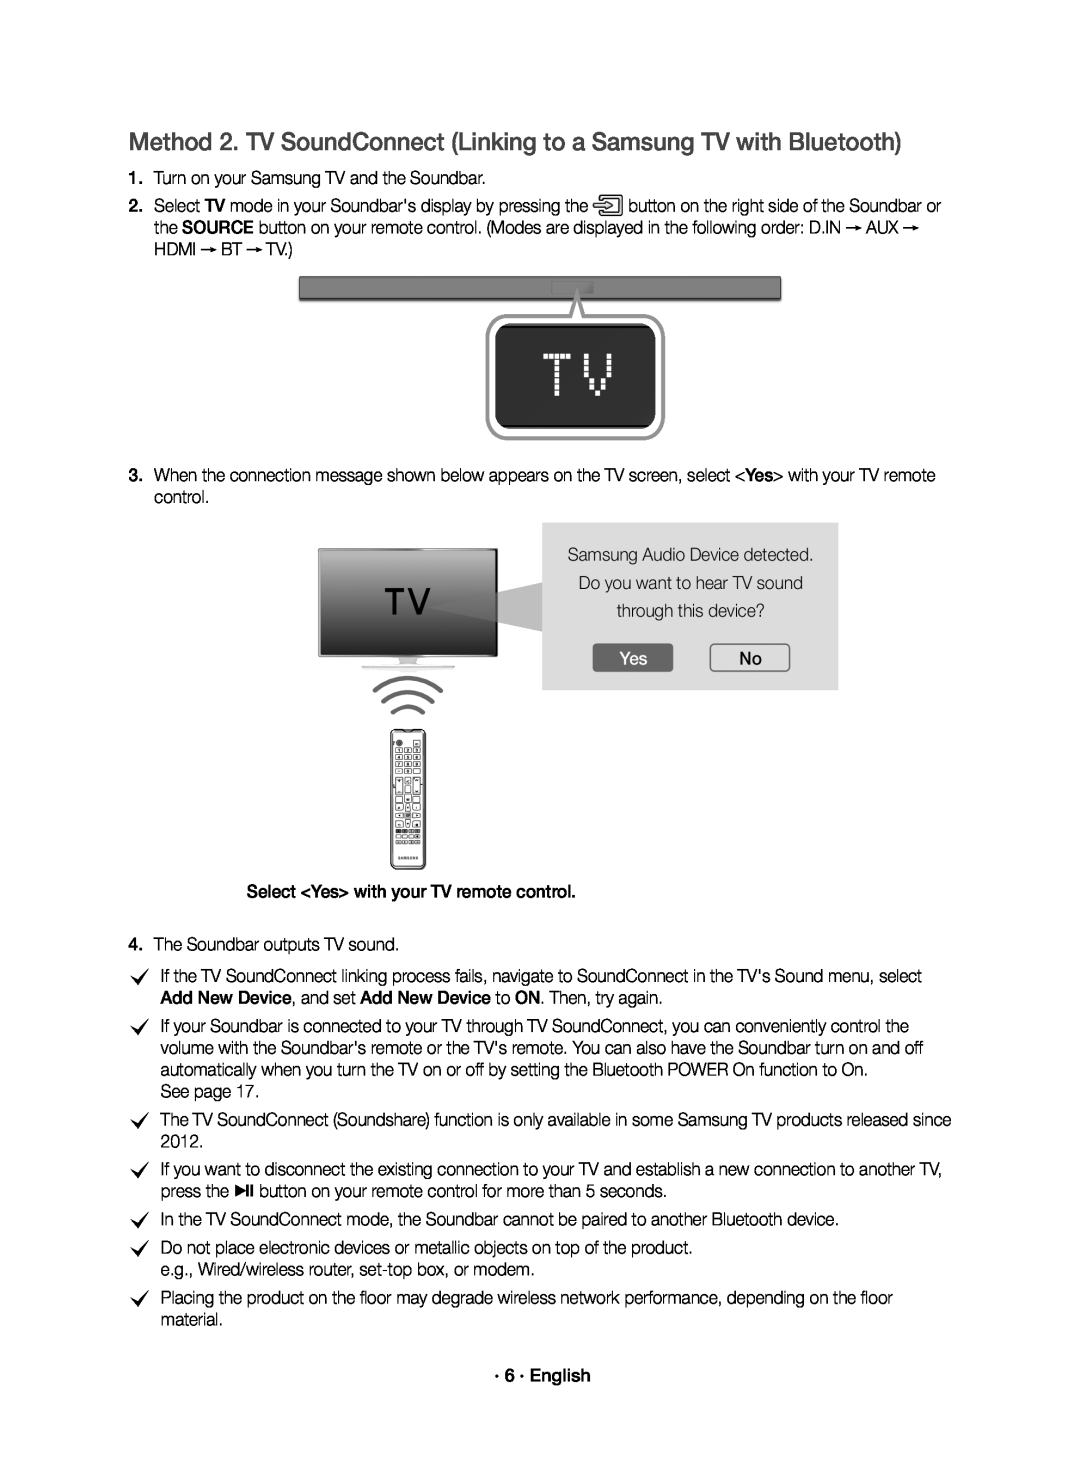 Method 2. TV SoundConnect (Linking to a Samsung TV with Bluetooth) Standard HW-K650